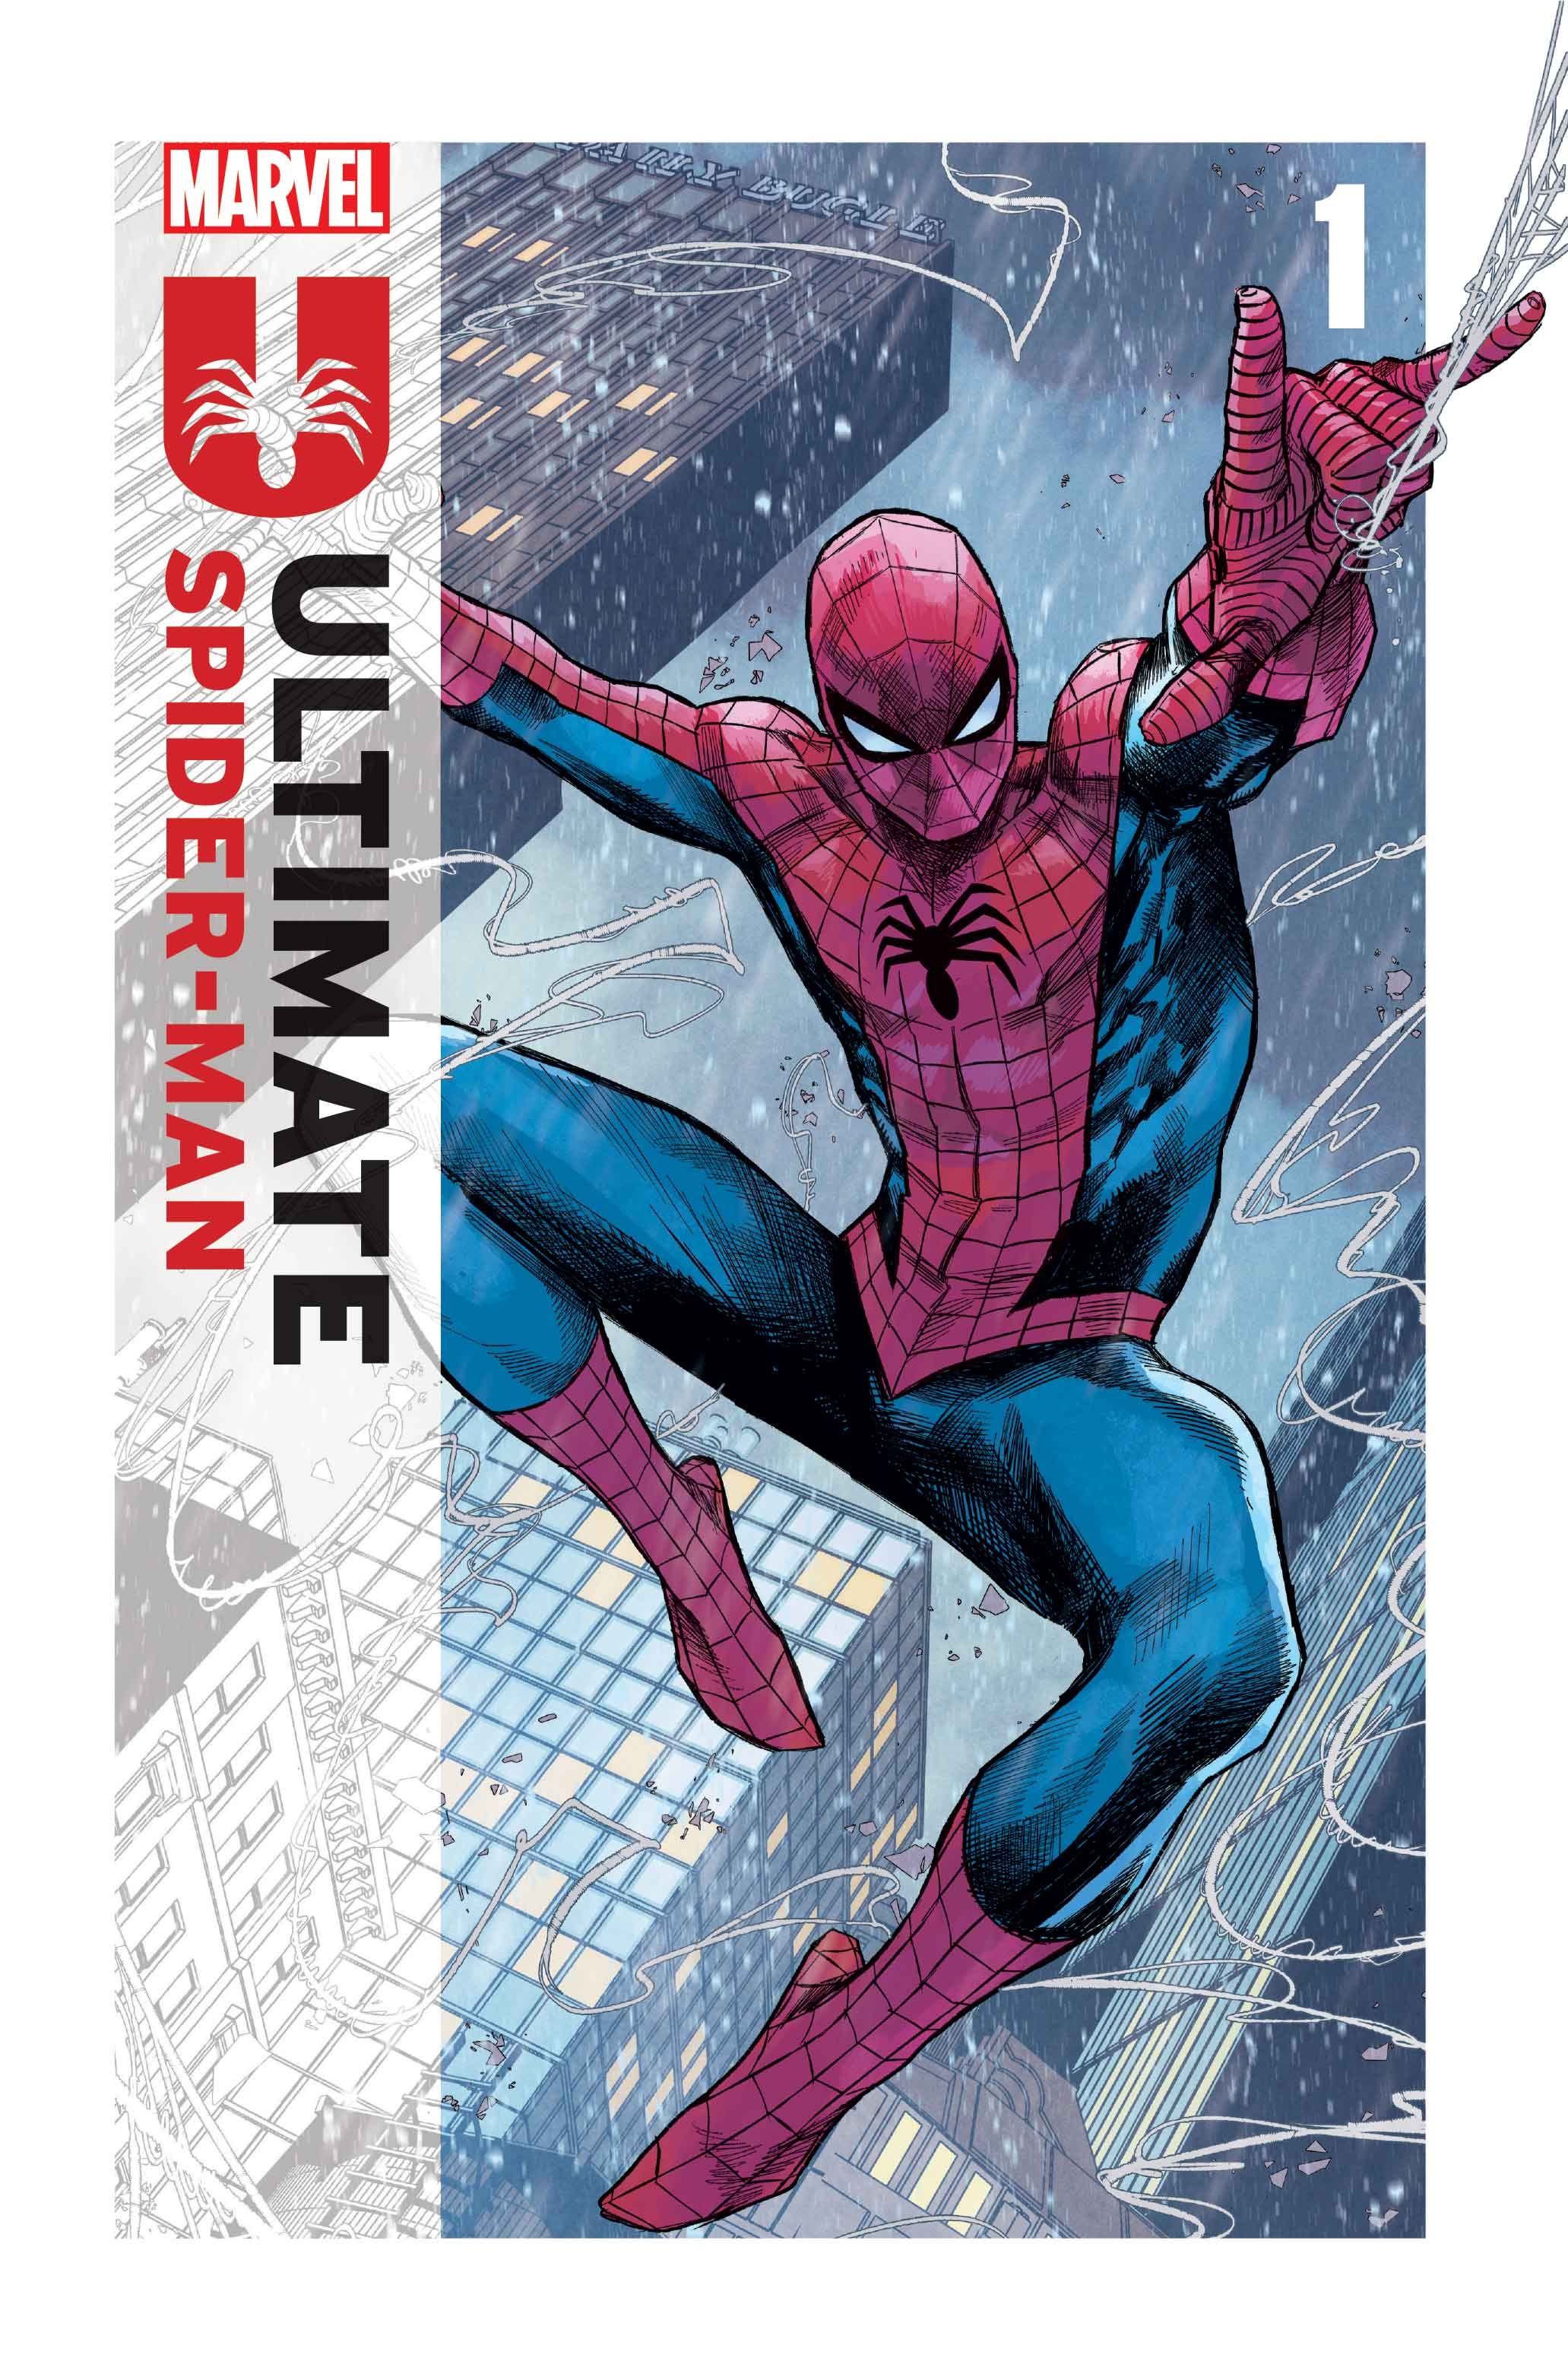 Who is The New SpiderMan? Marvel To Reboot Its Ultimate Universe With